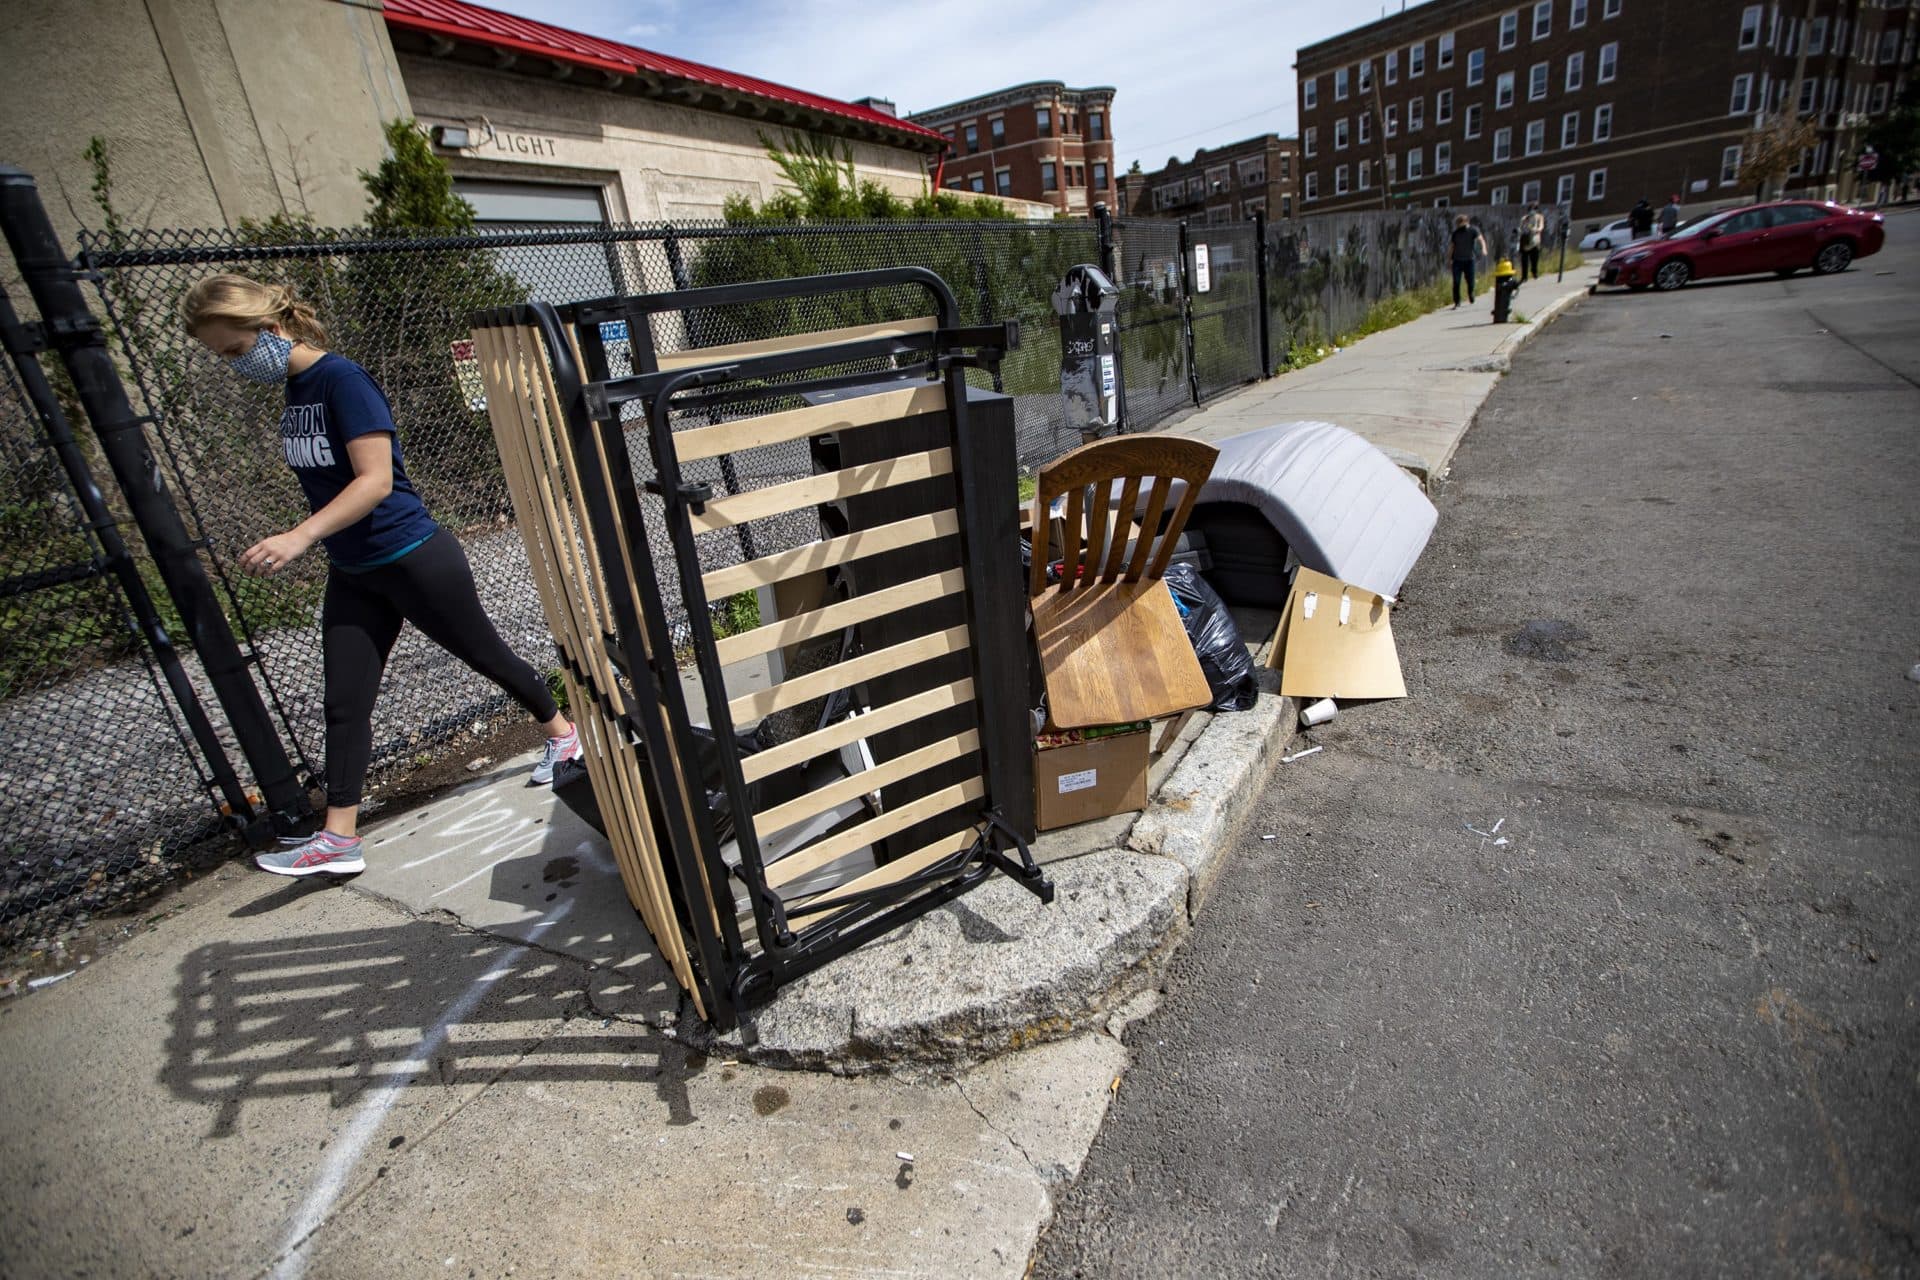 Discarded furniture and trash lay on the sidewalk along Commonwealth Avenue. (Jesse Costa/WBUR)